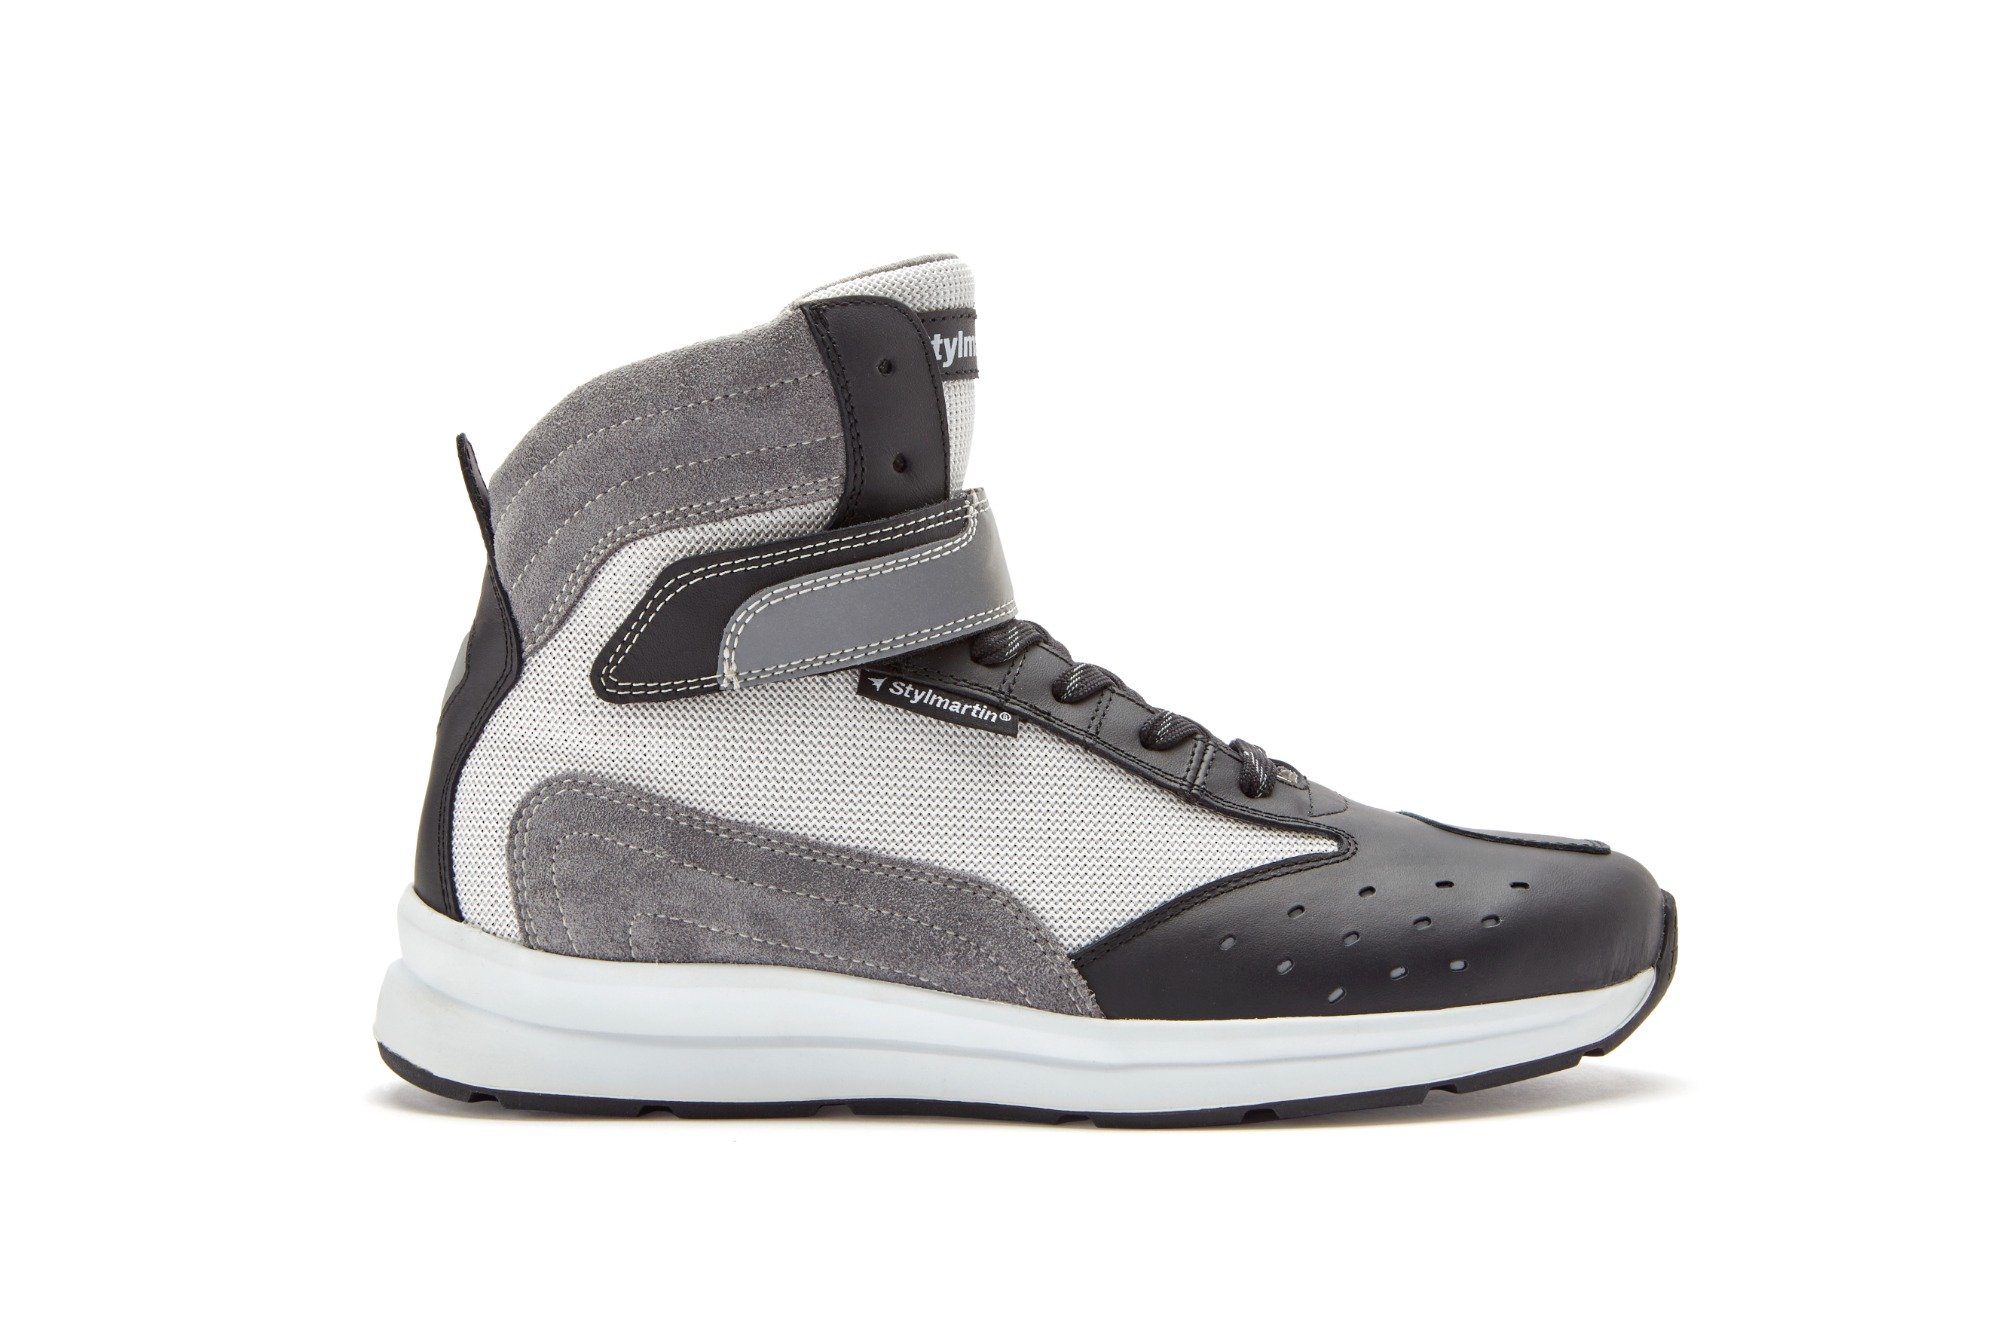 Image of Stylmartin Audax Air Black Anthracite White Size 39 ID 1000001309316